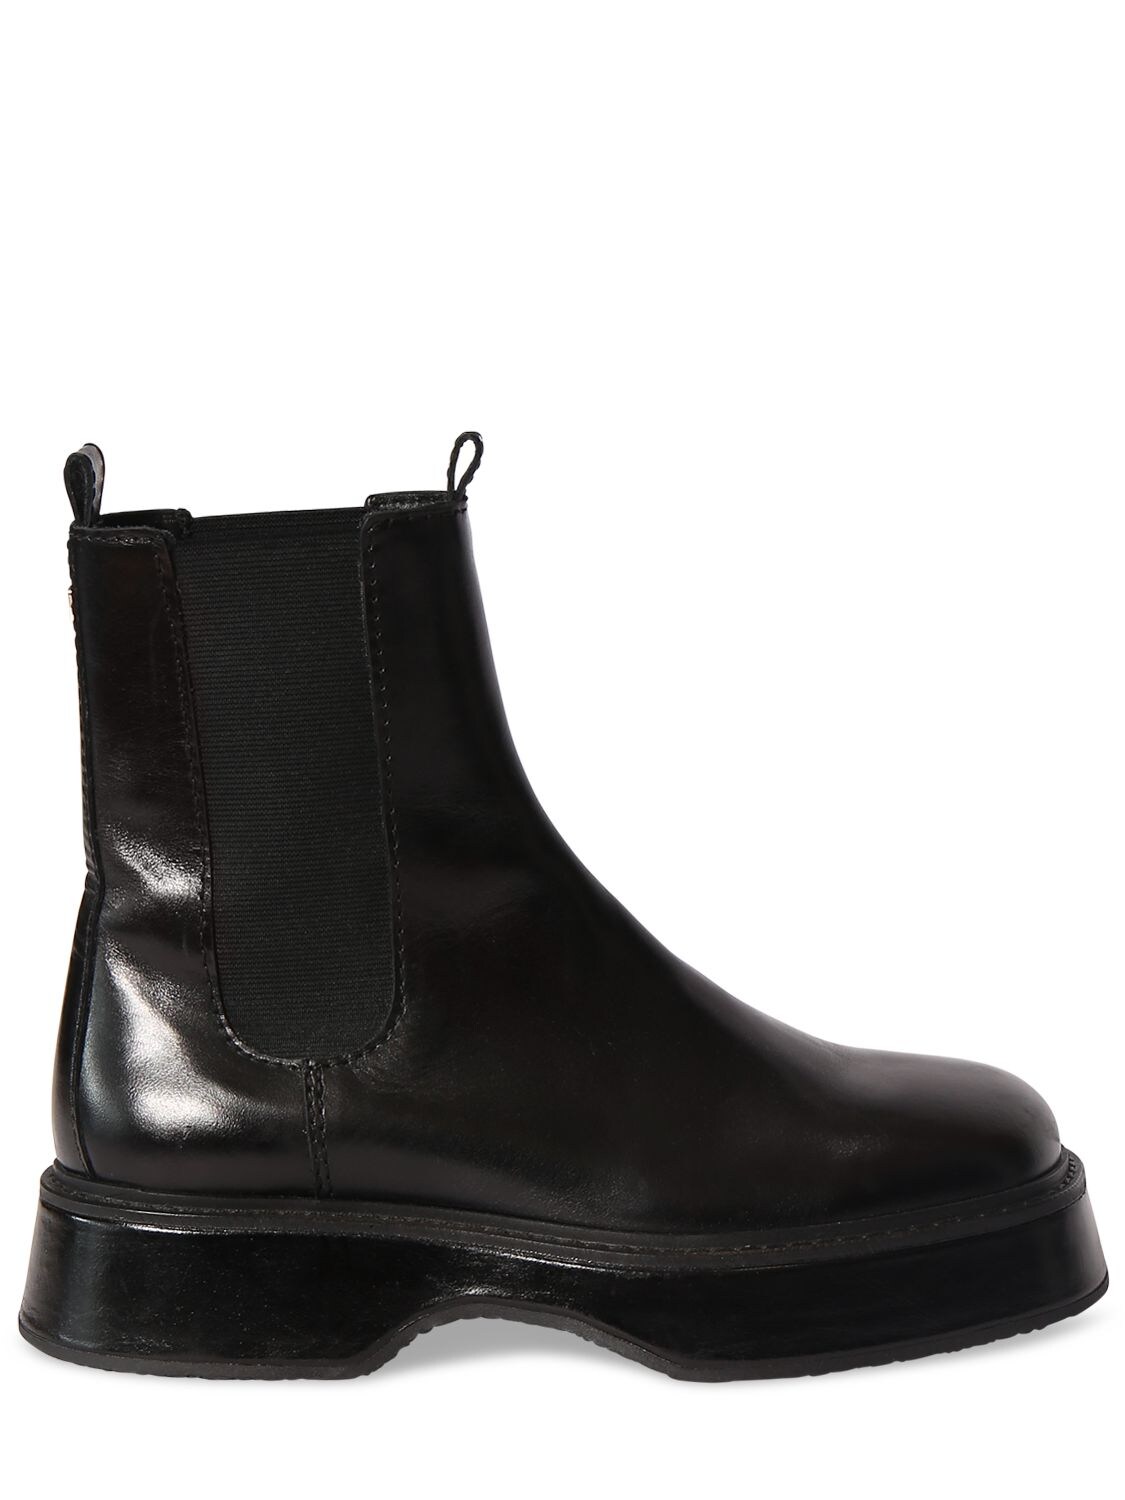 AMI ALEXANDRE MATTIUSSI 30MM LEATHER ANKLE BOOTS